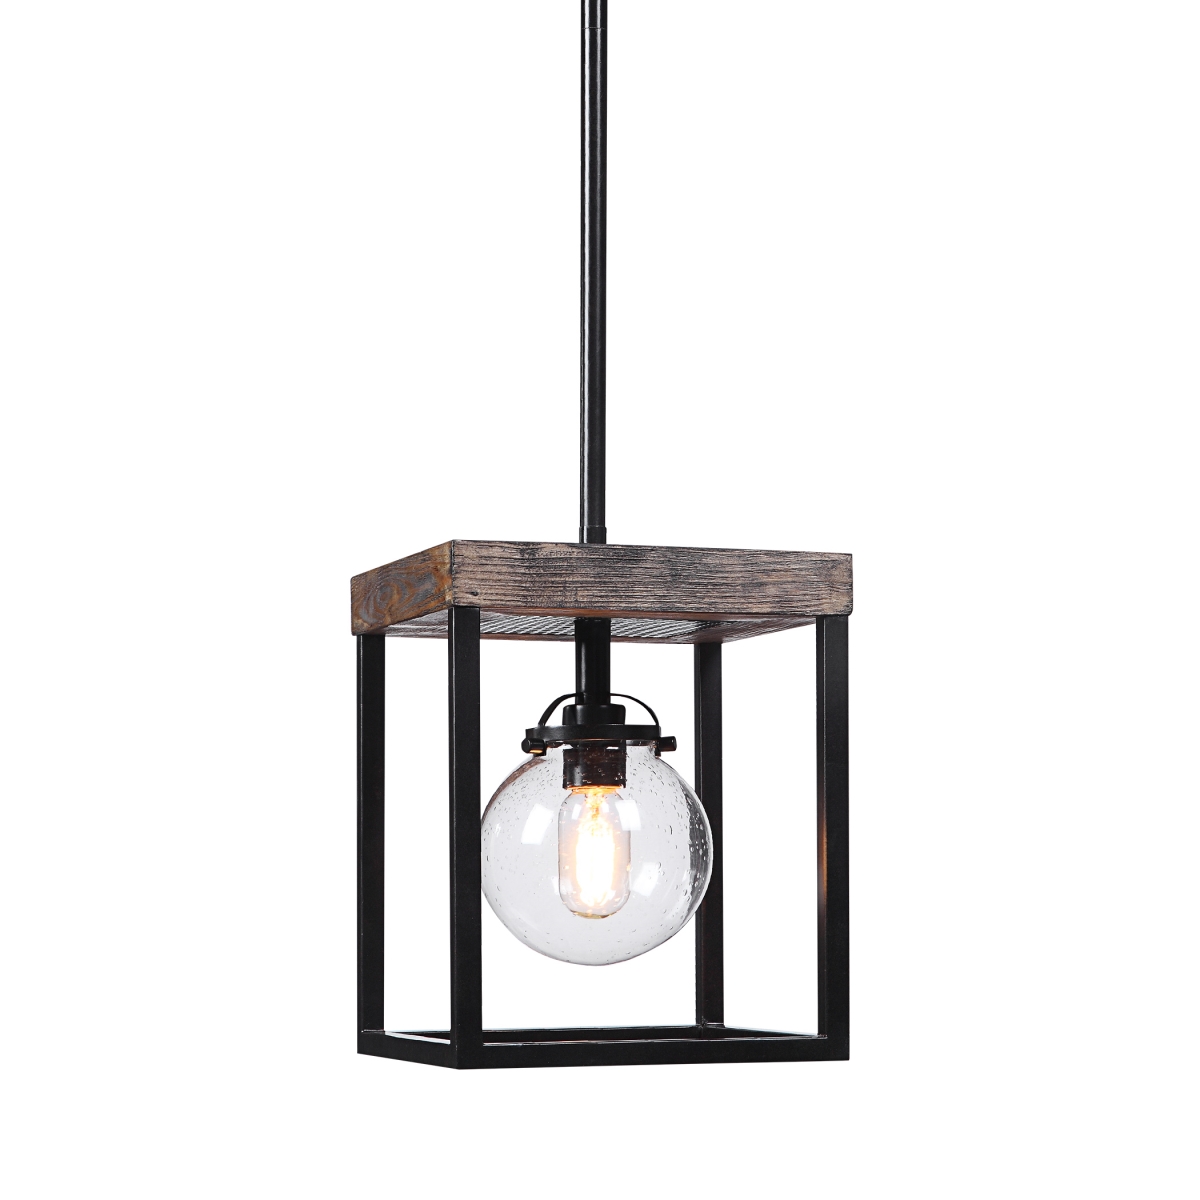 Picture of 212 Main 22183 Pearsall 1 Light Industrial Mini Pendant